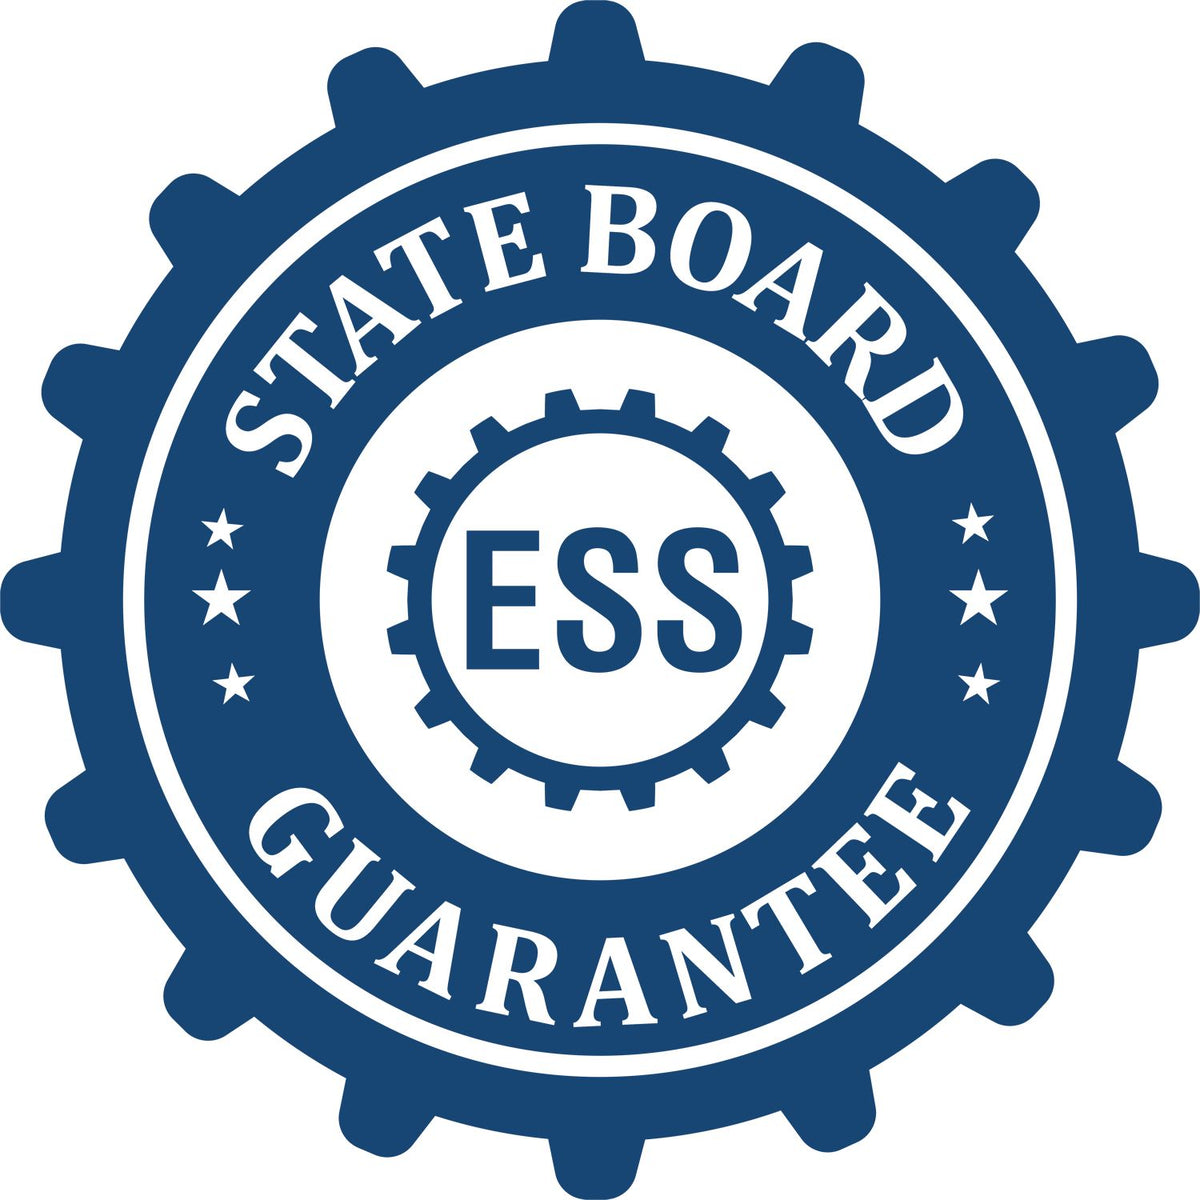 An emblem in a gear shape illustrating a state board guarantee for the Pennsylvania Geologist Desk Seal